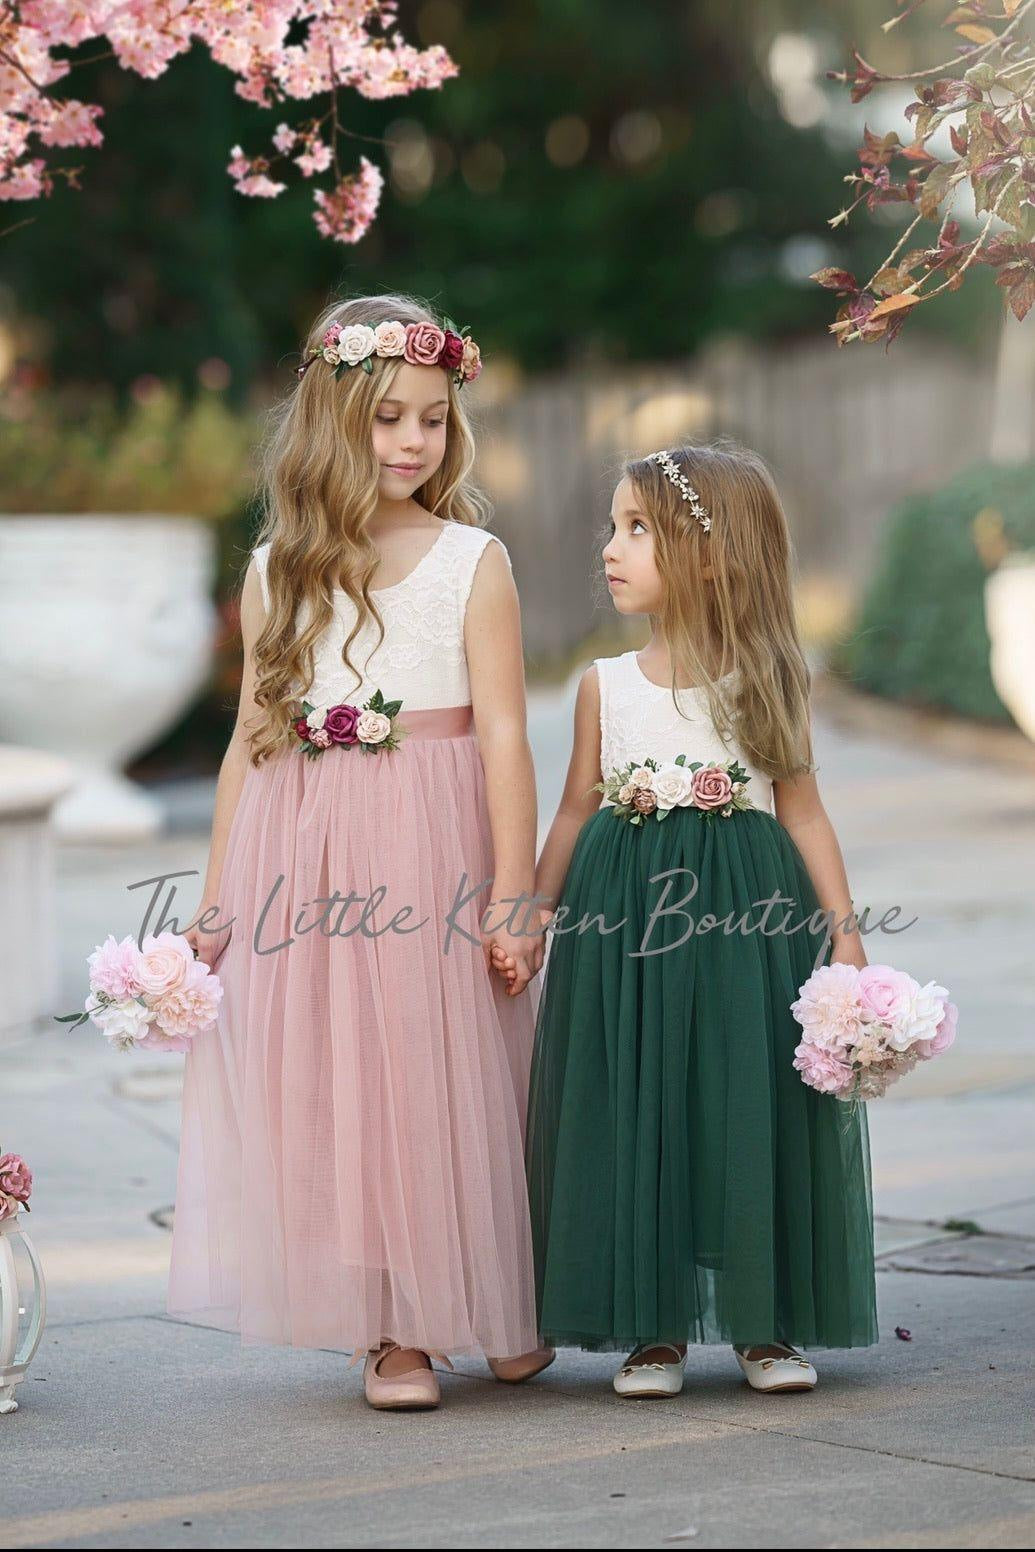 Sleeveless Lace and Tulle Flower Girl Dresses / Girls Special Occasion Dresses - The Little Kitten Boutique